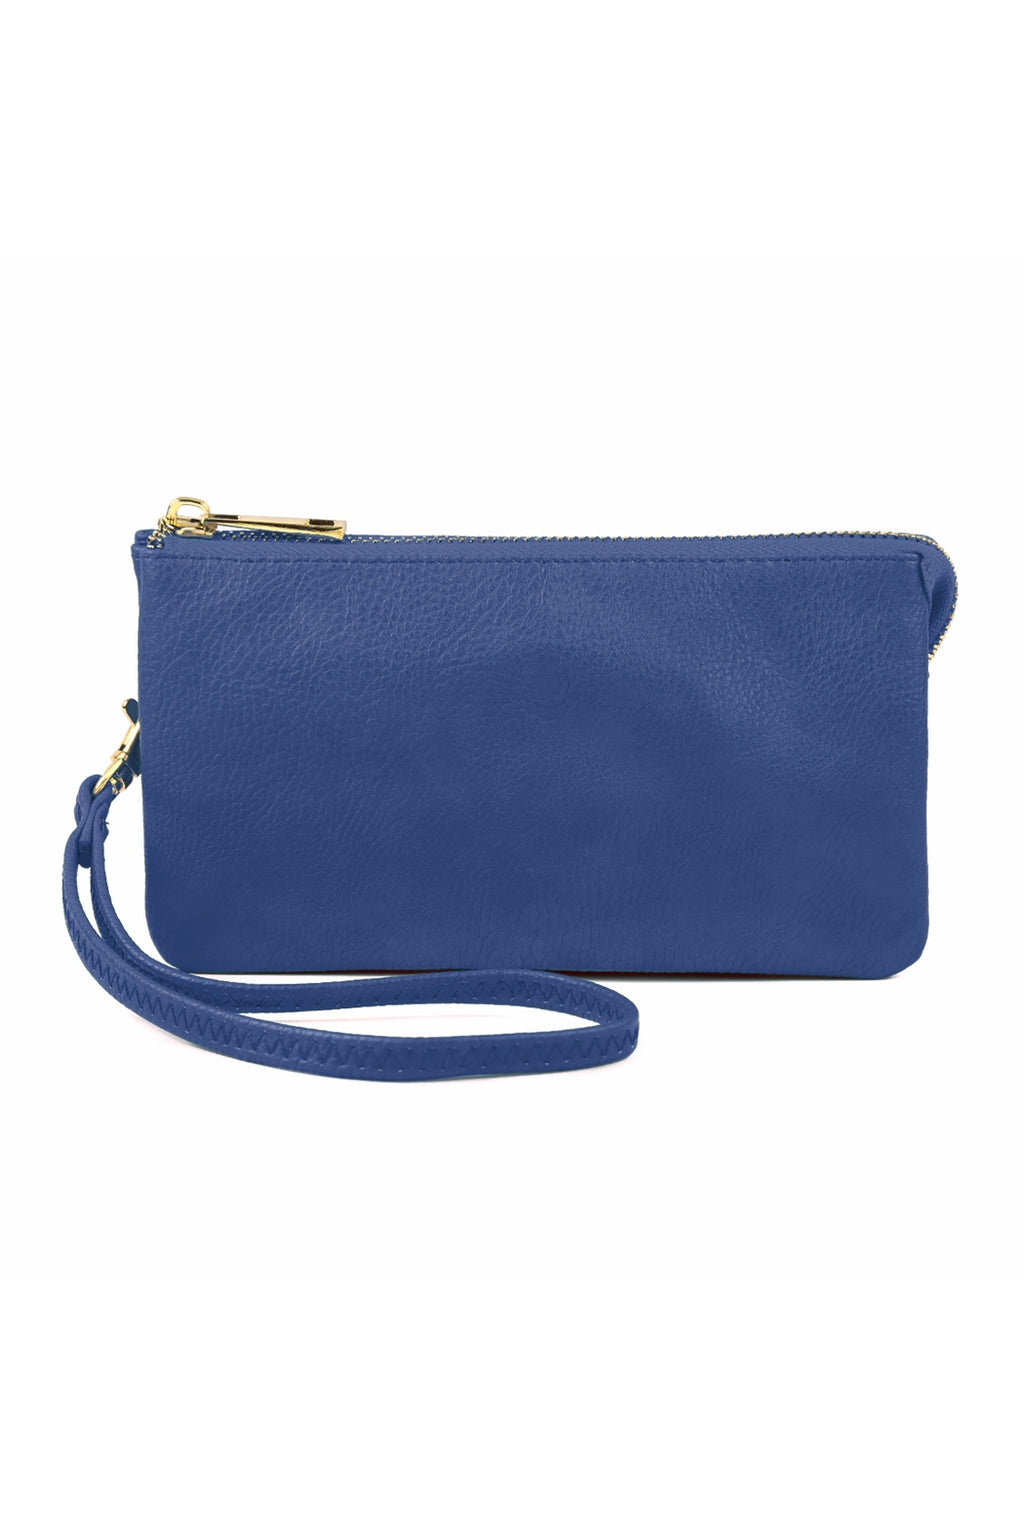 Leather Wallet with Detachable Wristlet Royal Blue - Pack of 6